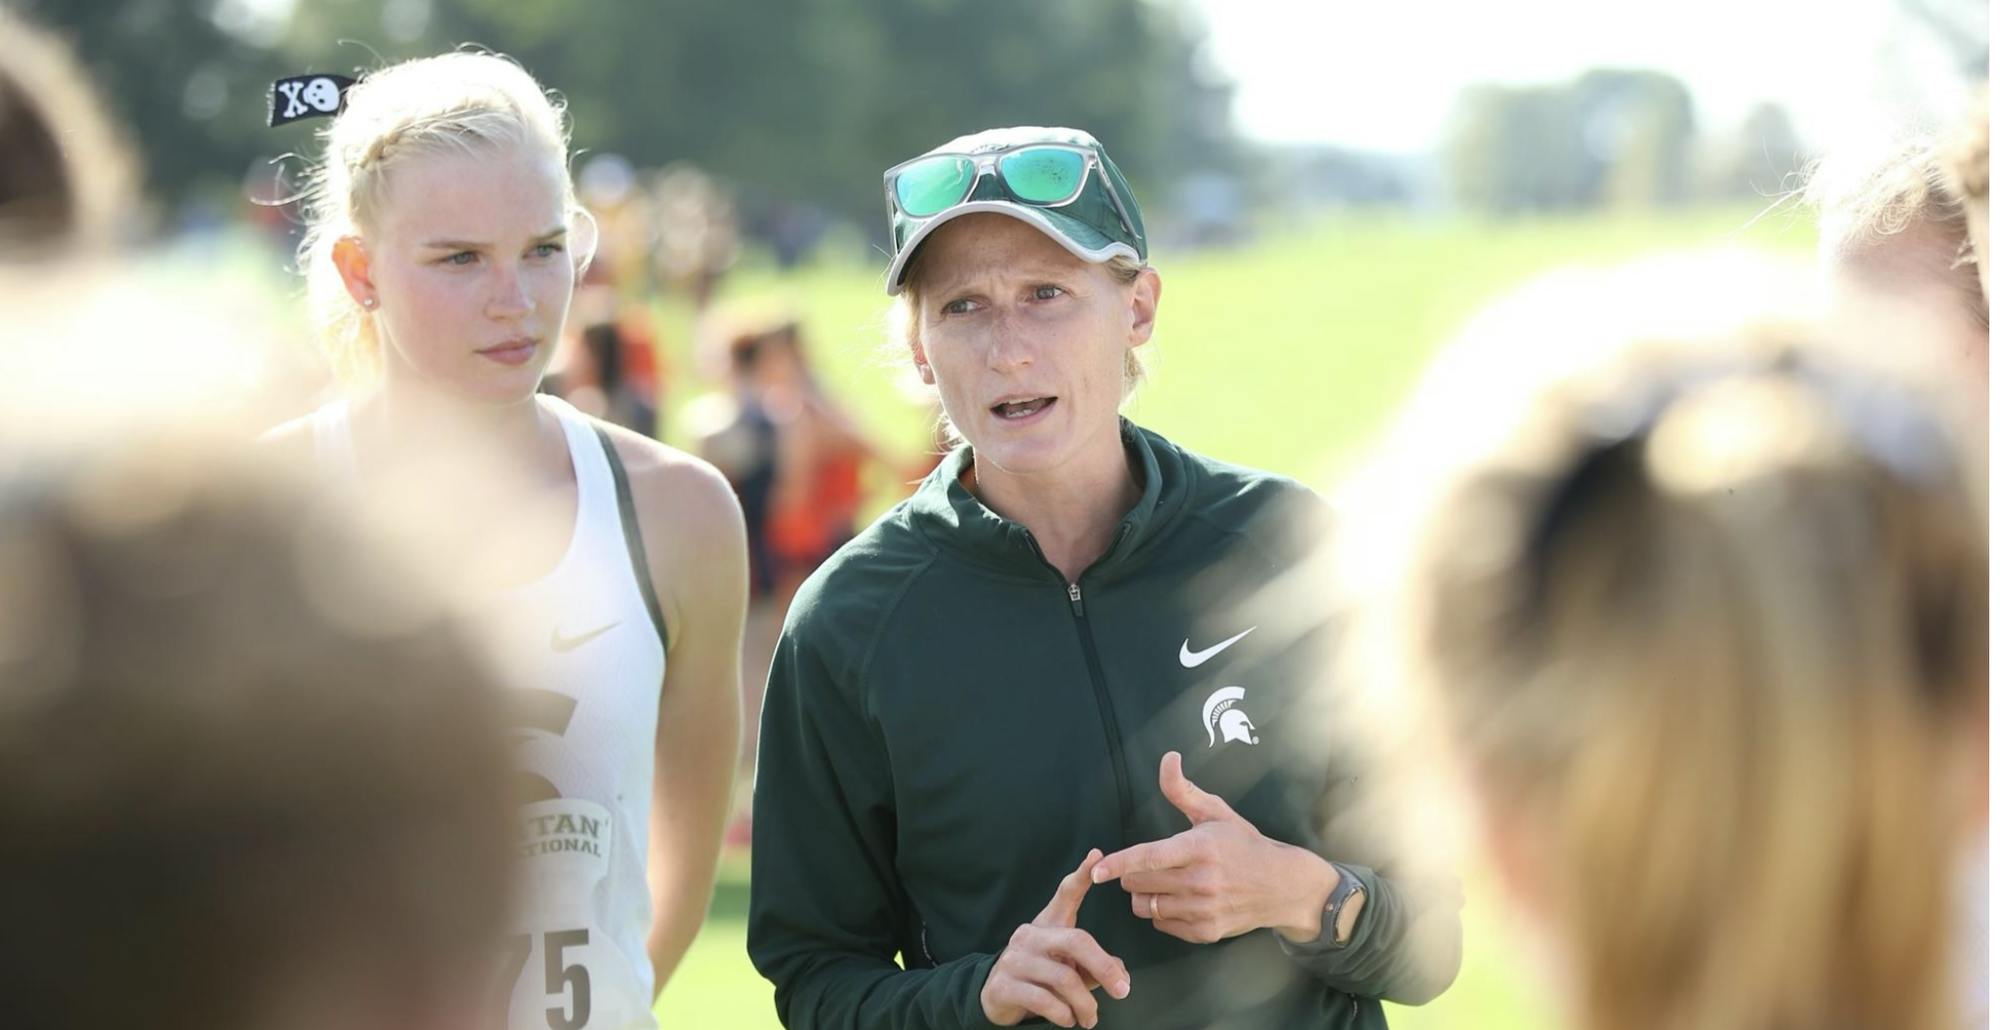 MSU Track and Field head coach Lisa Breznau speaking to her team during a huddle at an event. Photo courtesy of Michigan State Spartan Athletics.